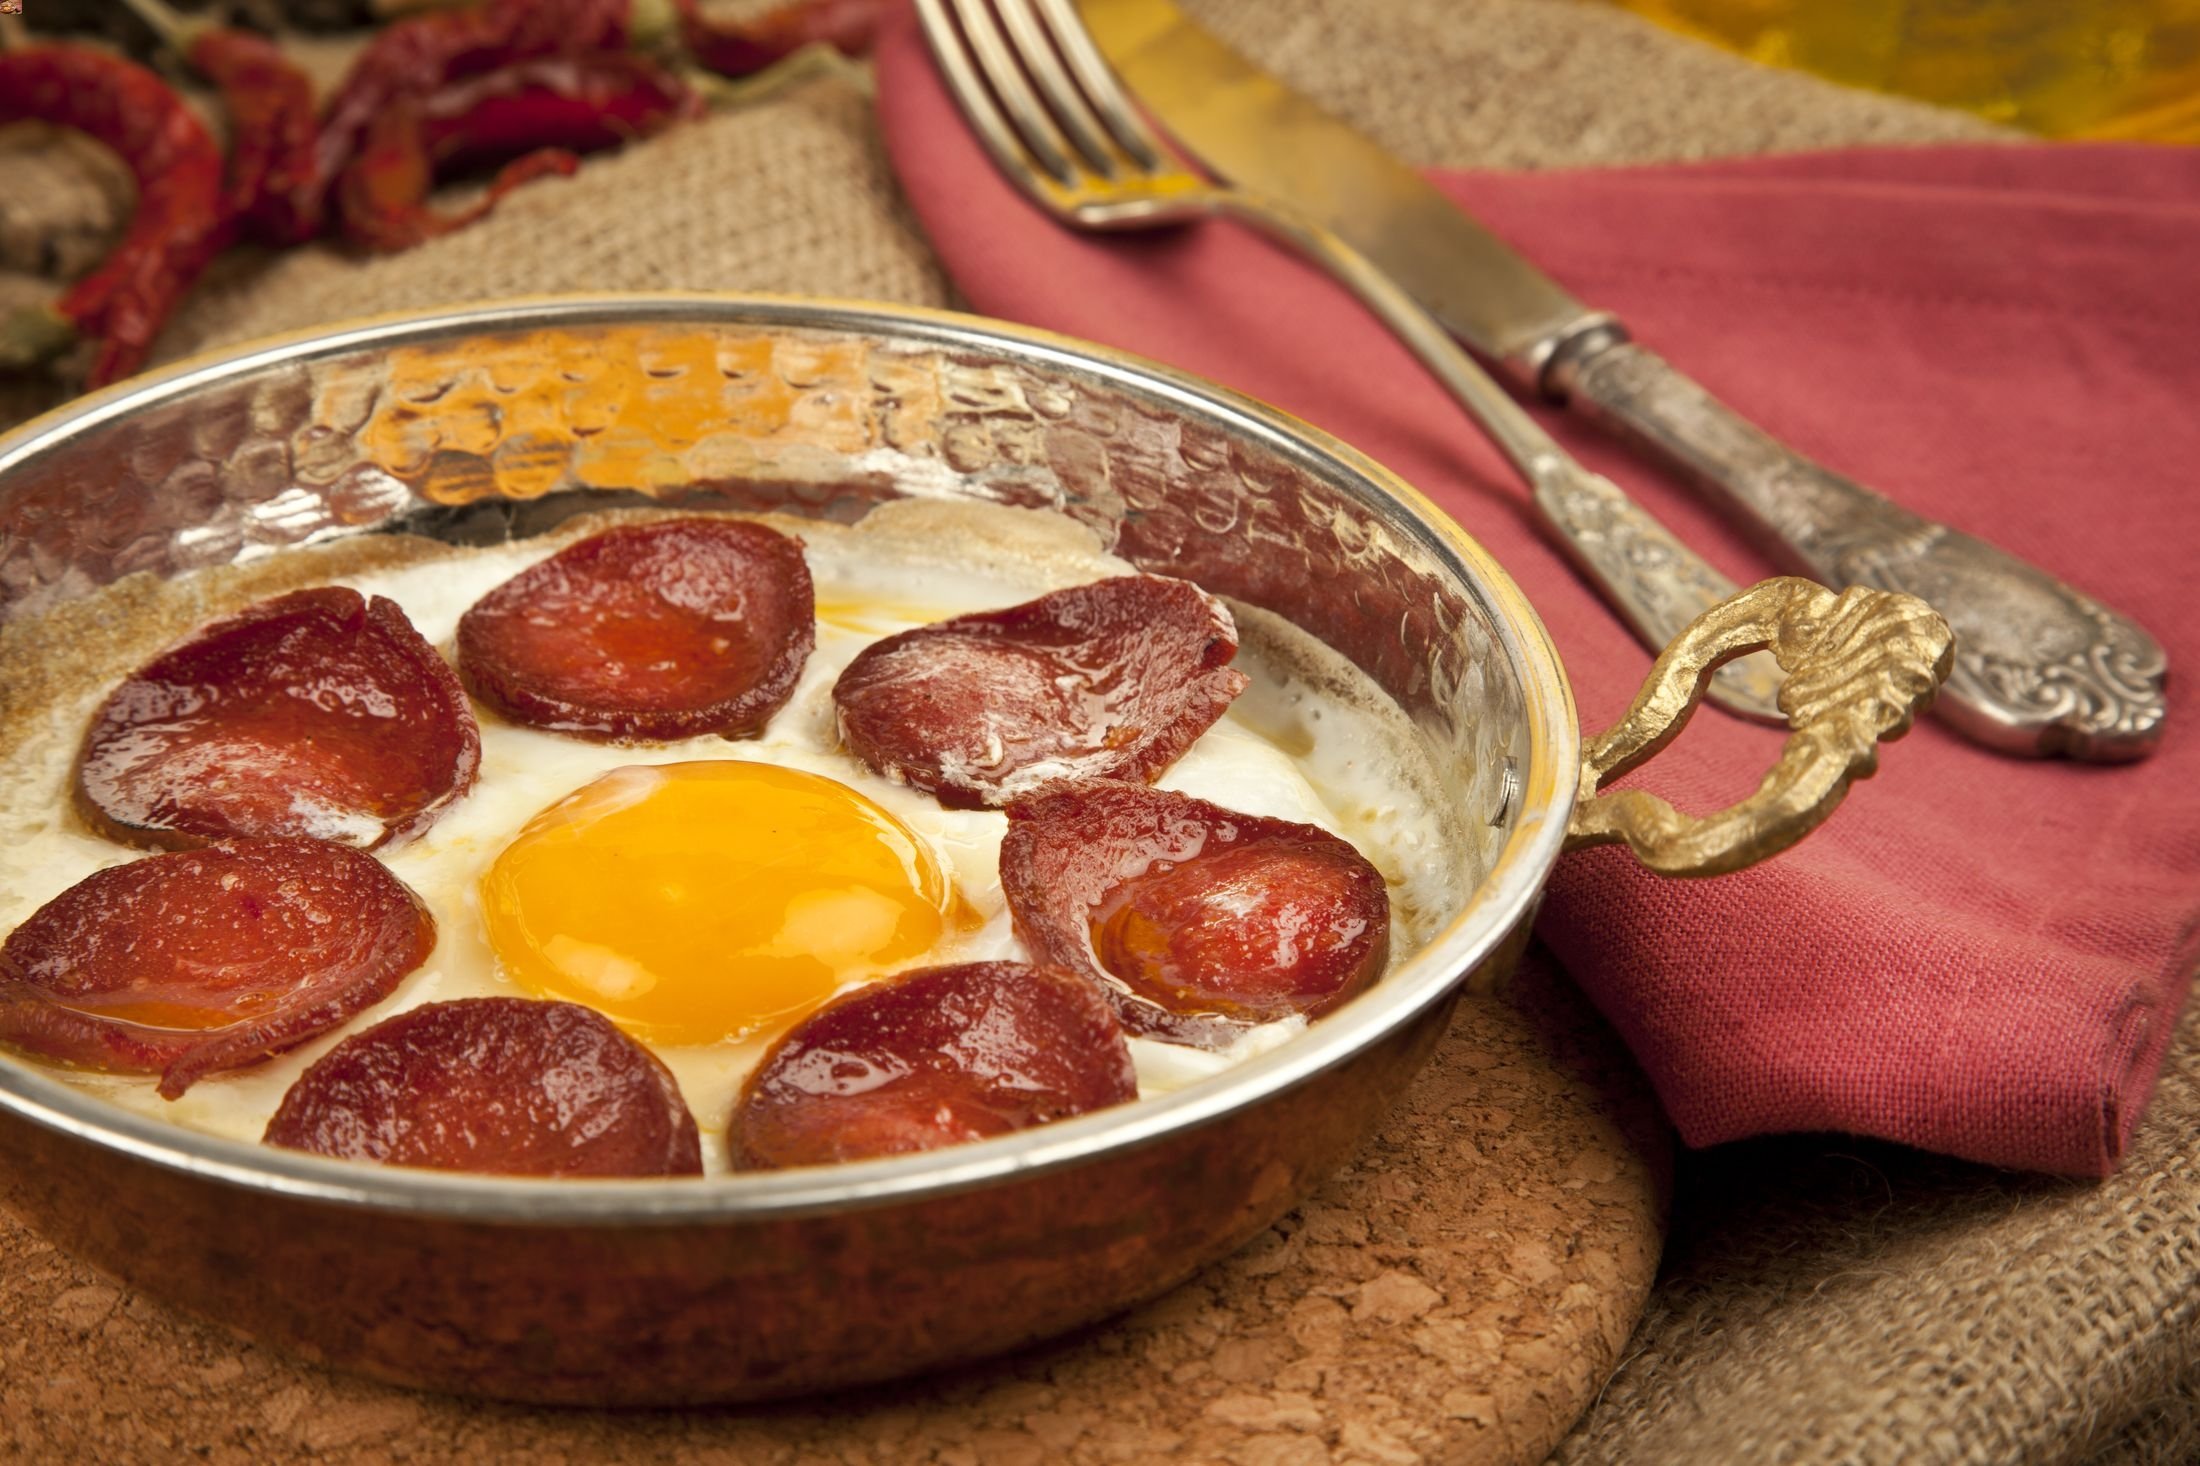 Scrambled eggs with little half-moon slices of Türkiye's spiced sucuk sausage is one of the most favorite Turkish egg dishes out there. (Shutterstock Photo)